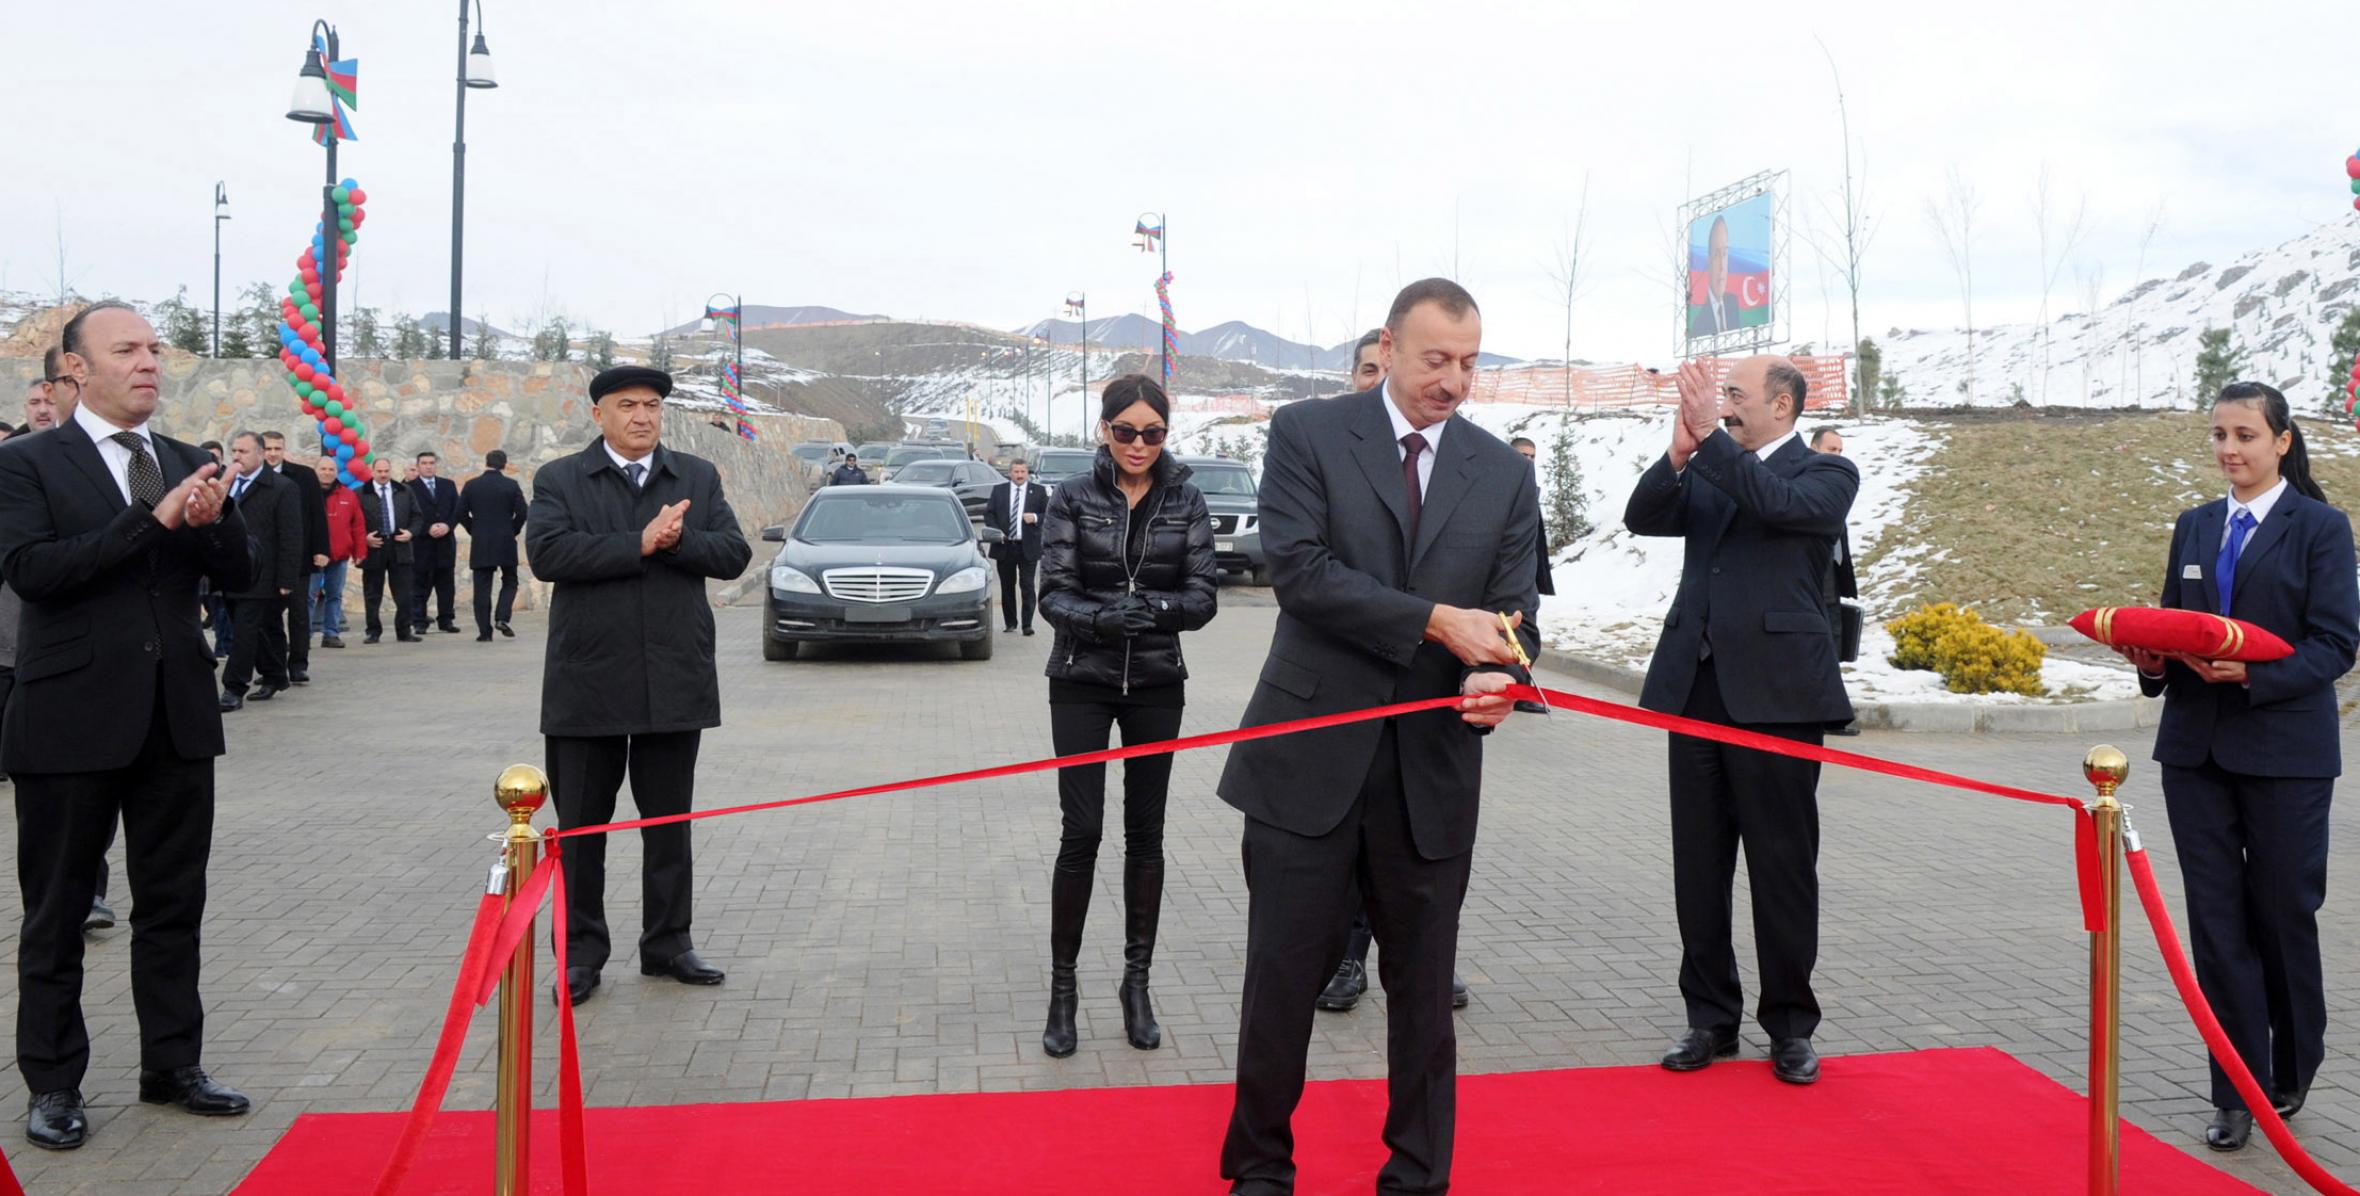 Ilham Aliyev attended the opening of the “Zirva” hotel which is part of the Shahdag winter and summer tourist center in Gusar